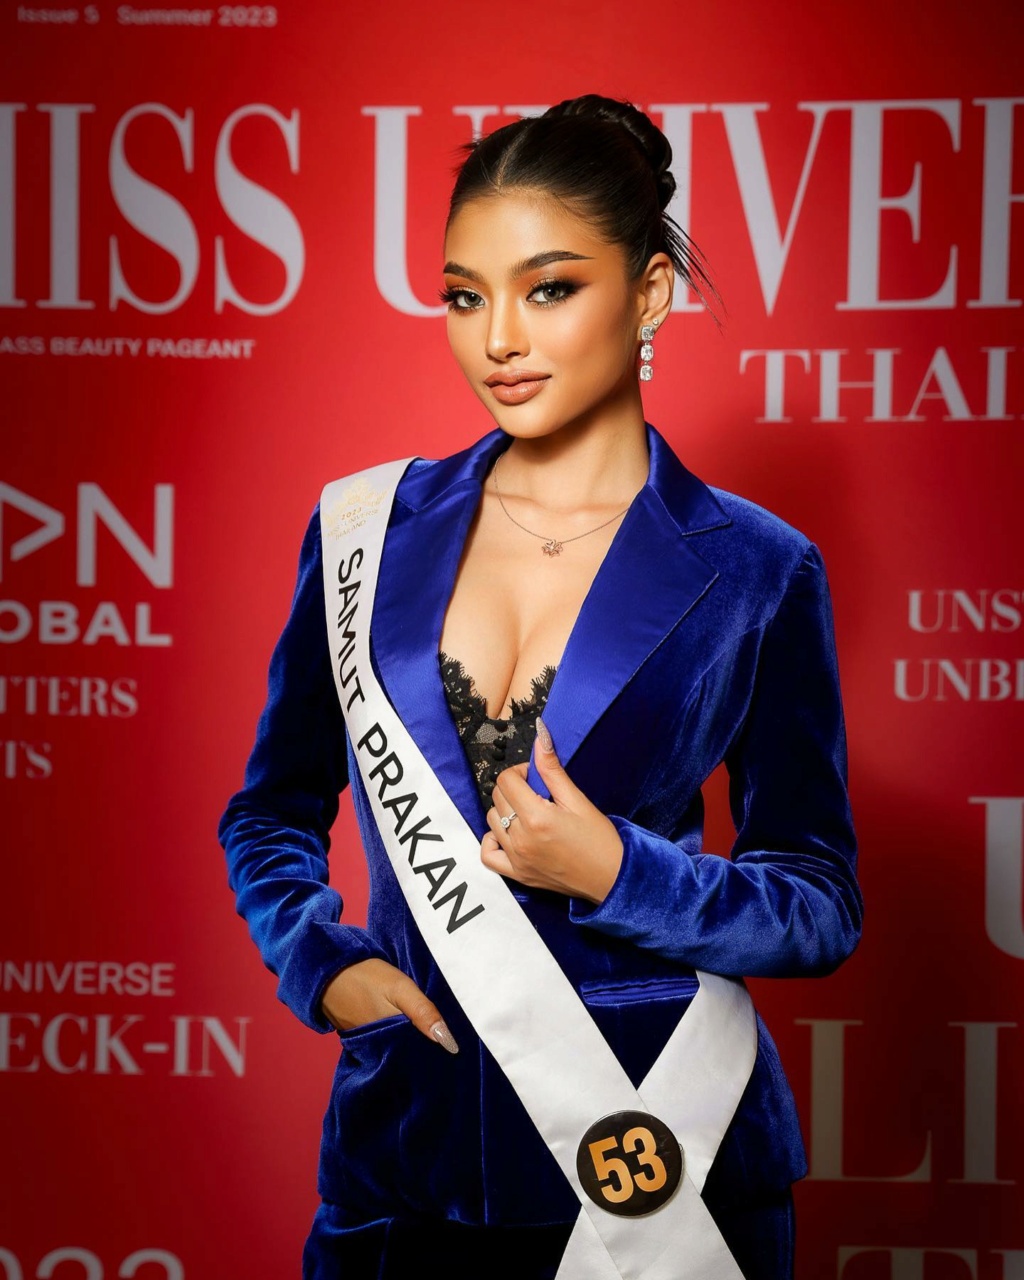 Road to MISS UNIVERSE THAILAND 2023 - Page 6 Ins11372